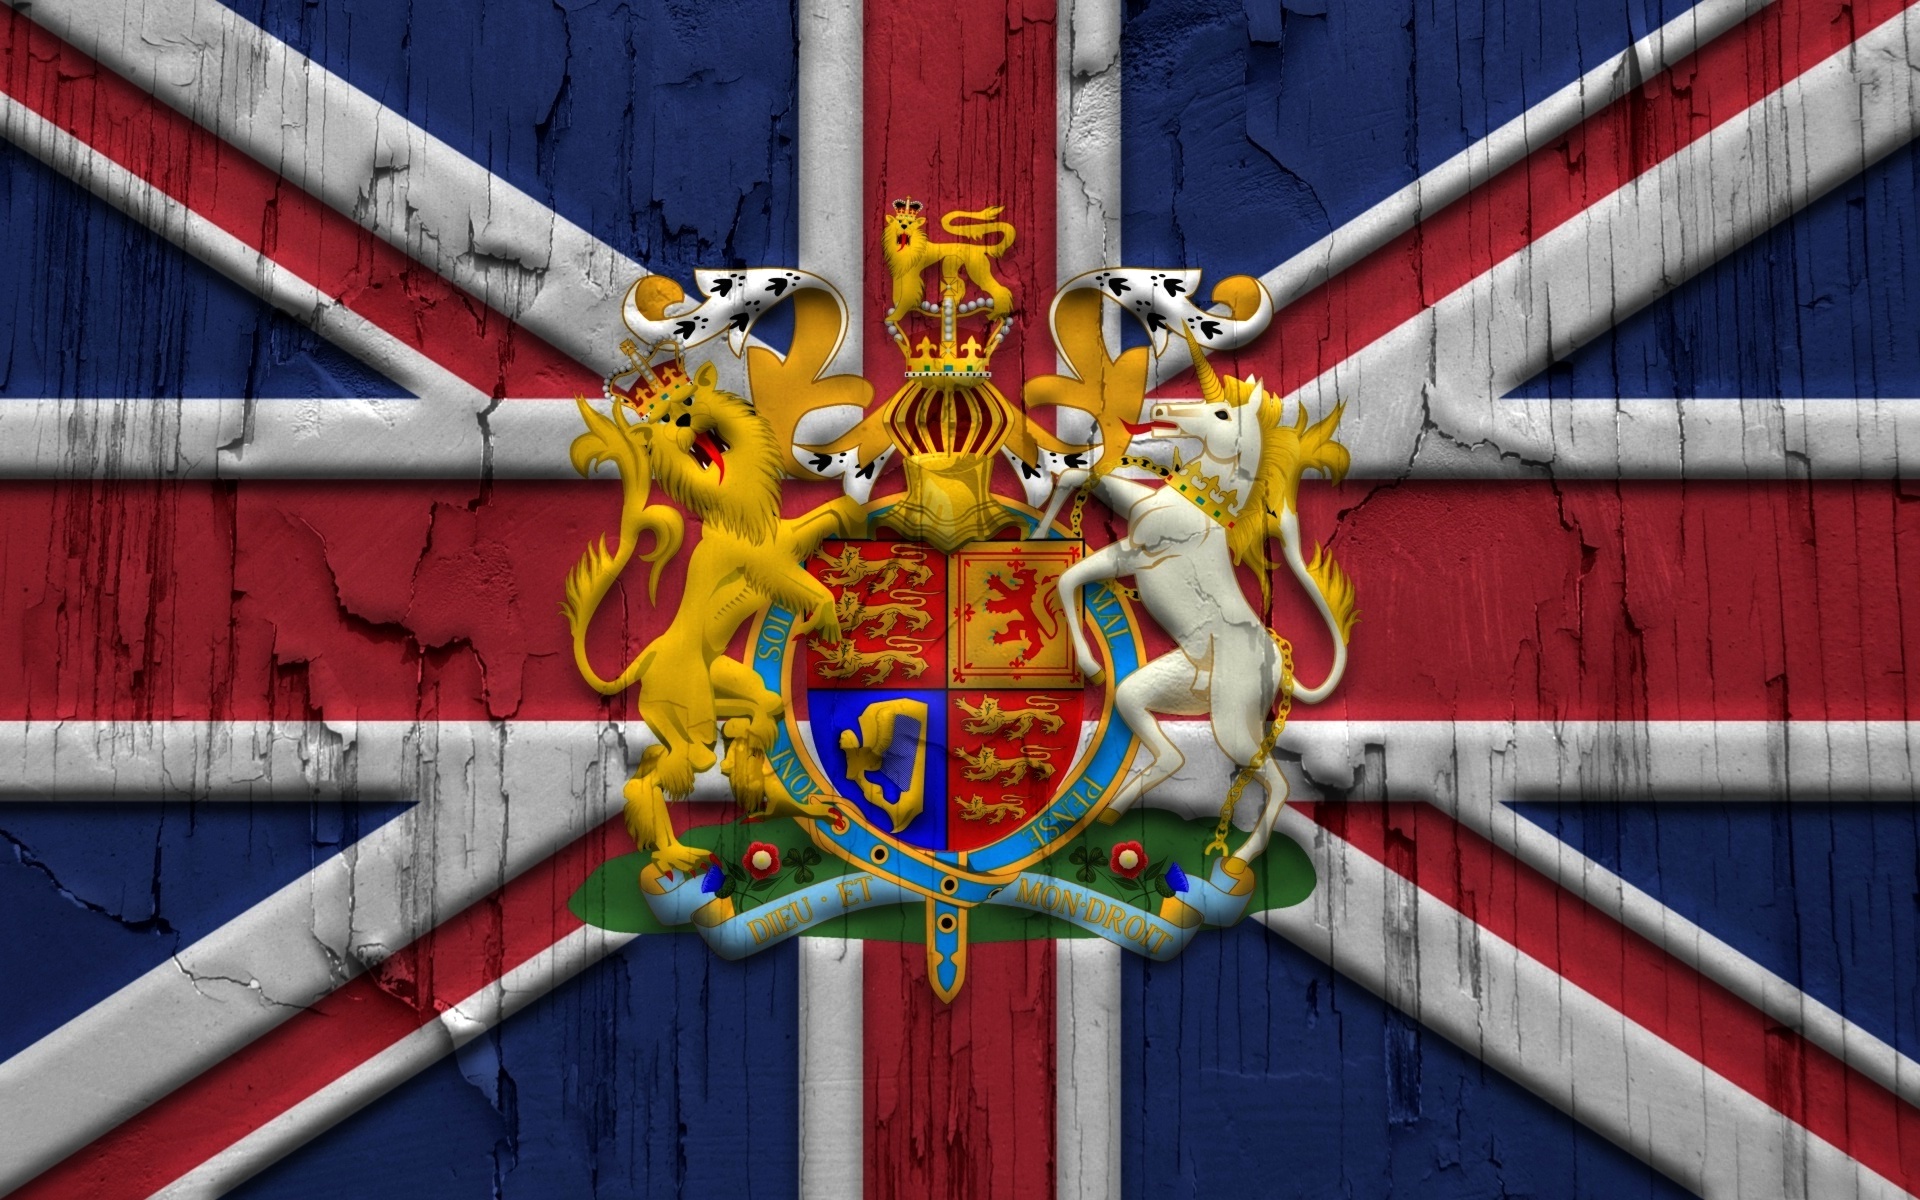 HD UK Wallpapers Depict The beautiful Images Of British